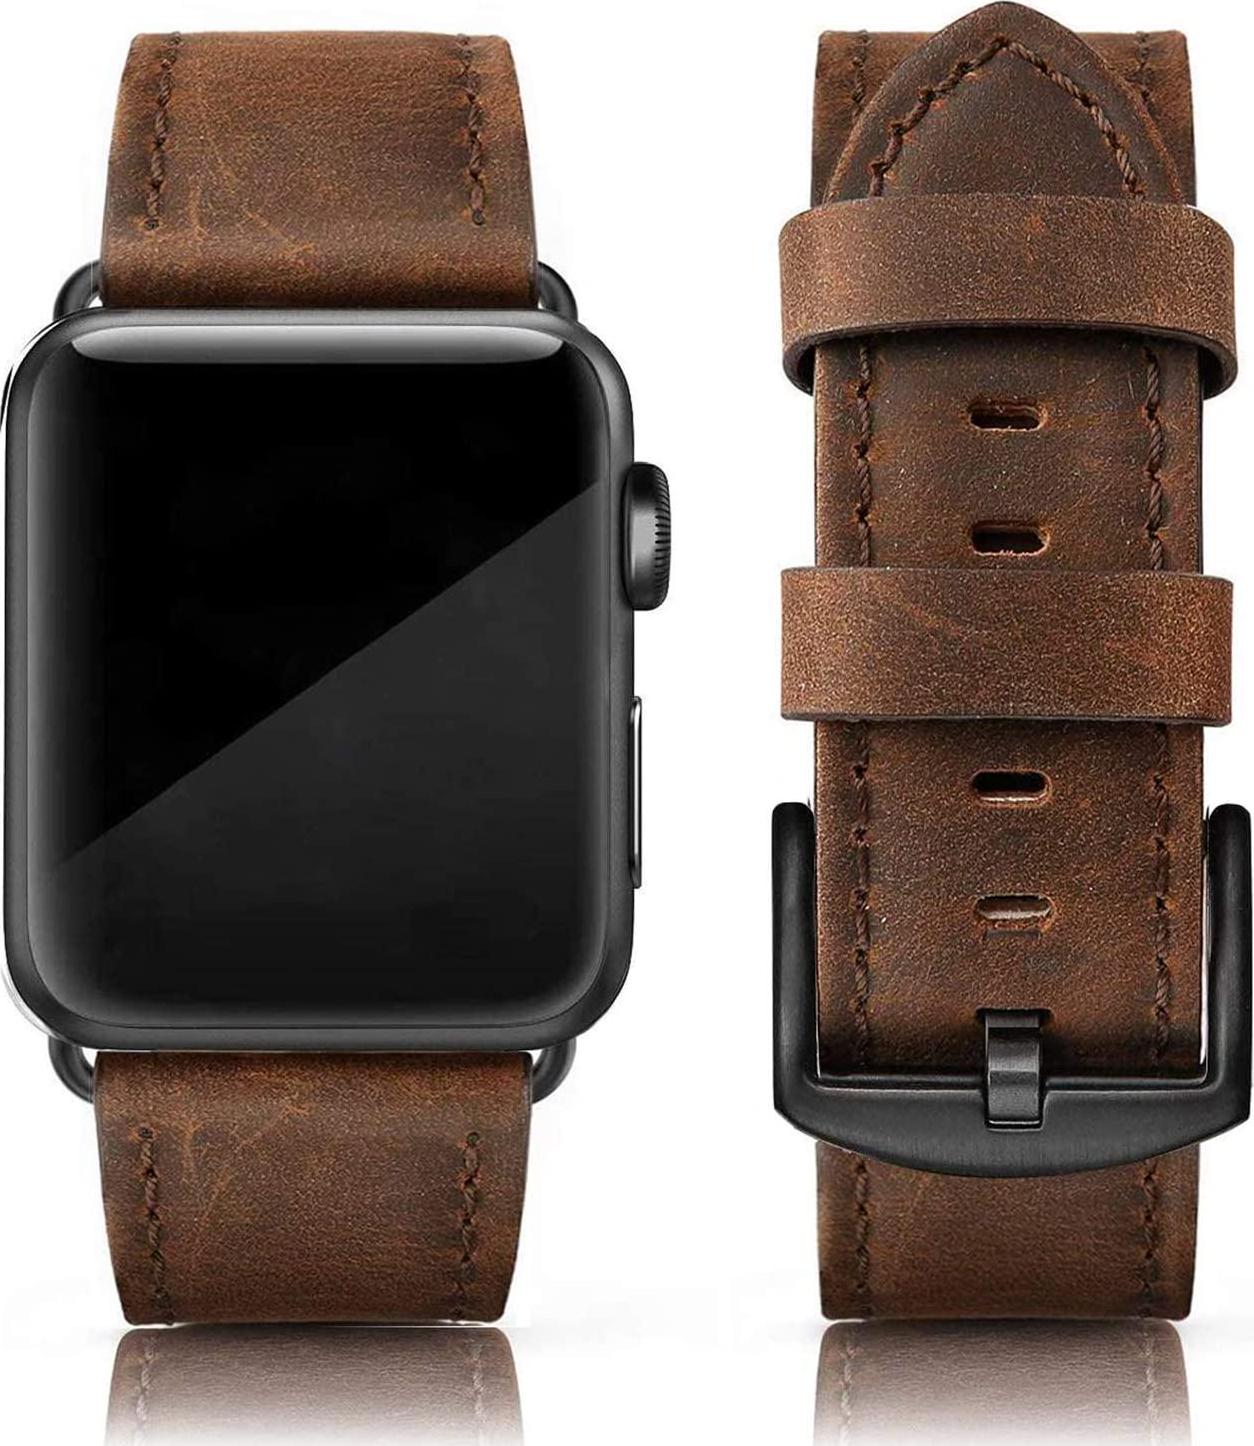 EDIMENS, EDIMENS Leather Bands Compatible with Apple Watch 45mm 42mm 44mm Band Men Women, Vintage Genuine Leather Wristband Replacement Band Compatible for Apple Watch iwatch Series 7 6 5 4 3 2 1, SE Sports